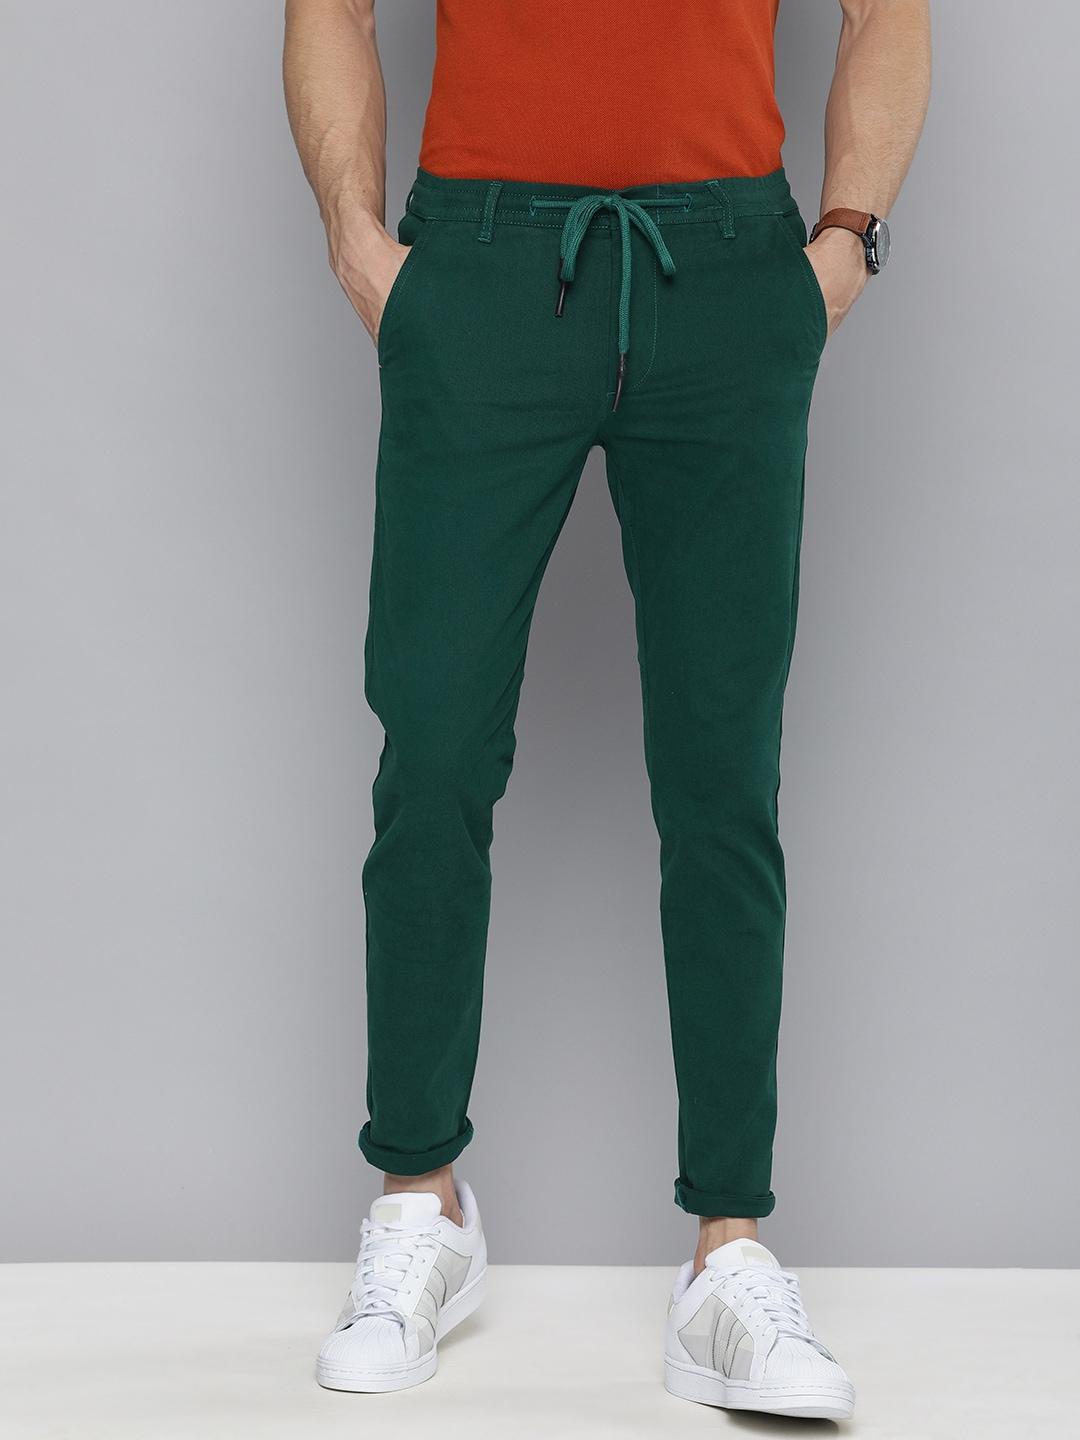 The Indian Garage Co Men Teal Slim Fit Chinos Trousers